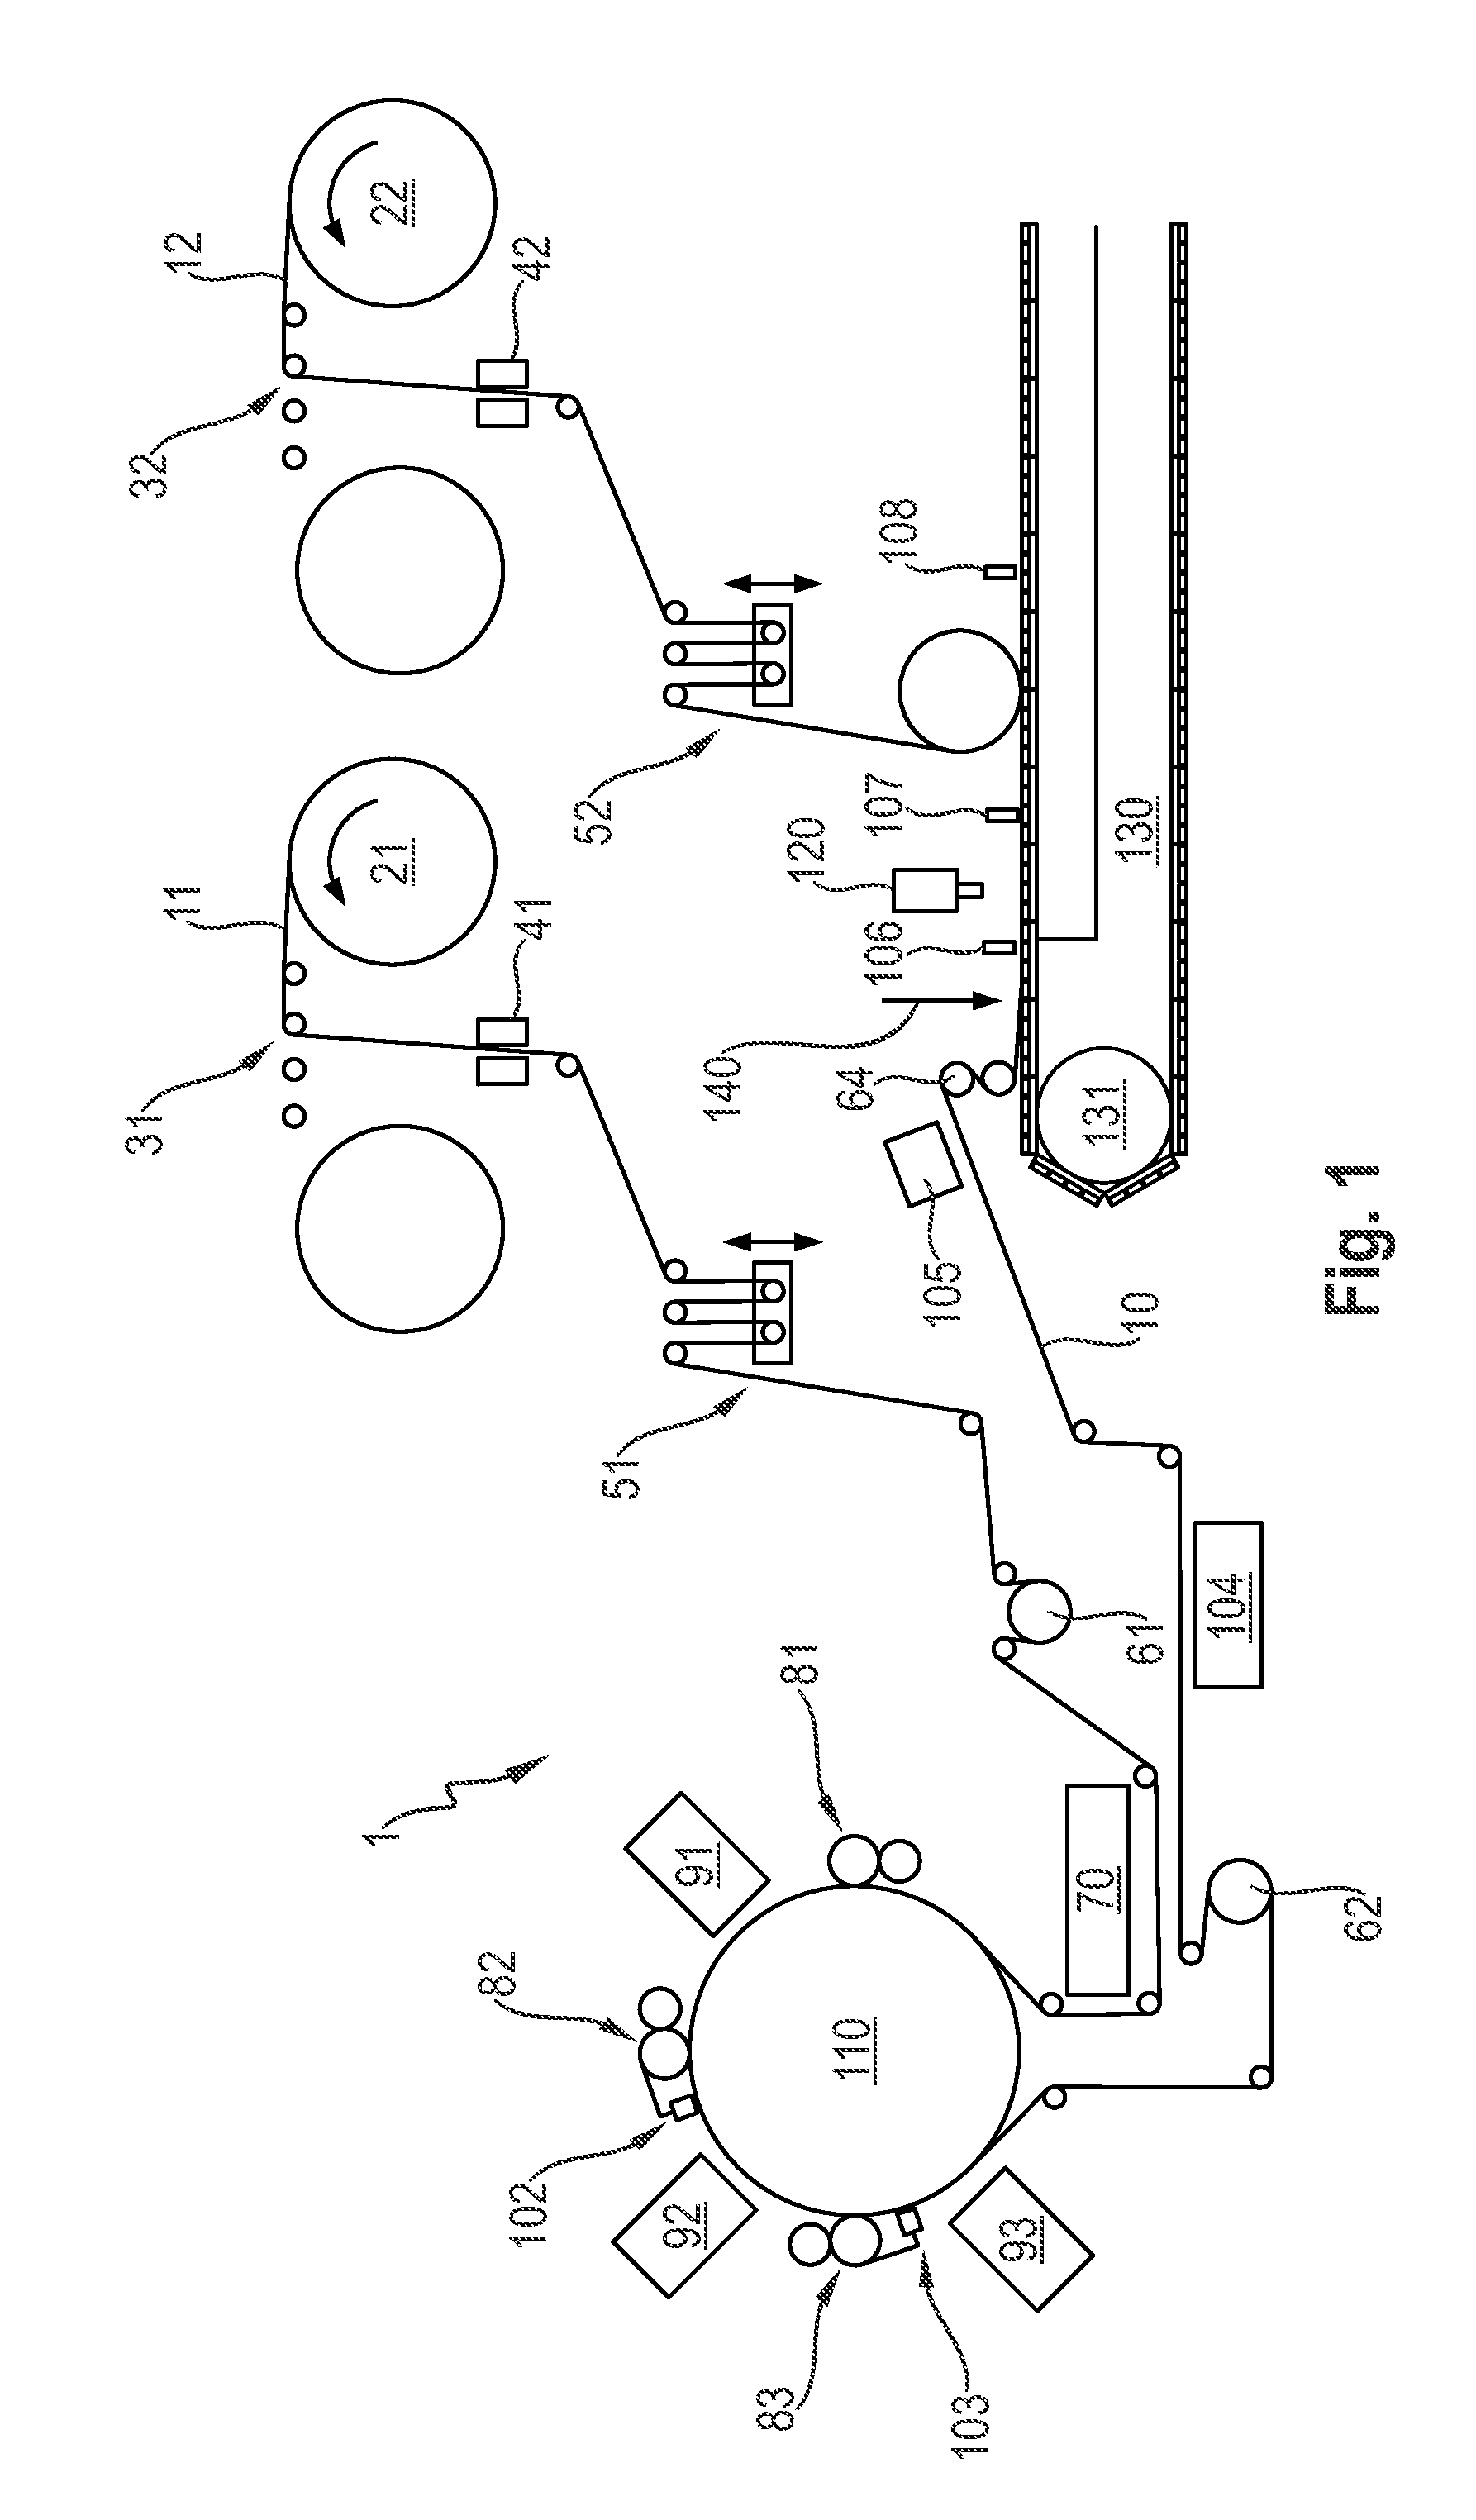 Apparatus to print on water-soluble film